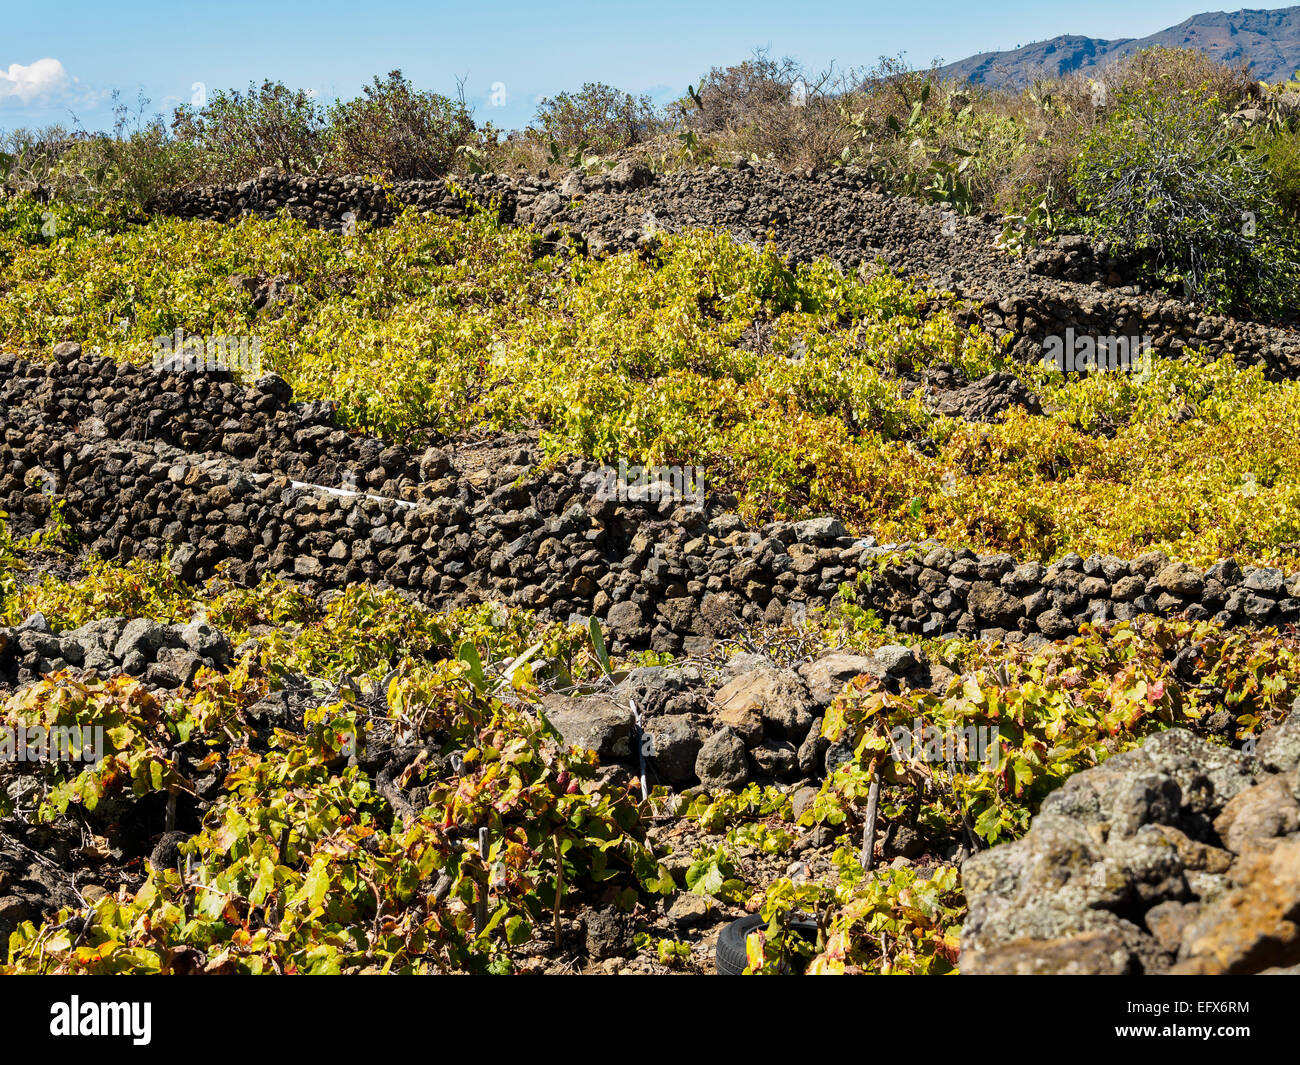 Grapevines grow in vineyards at El Paso on the Canary Island of La Palma. Stock Photo